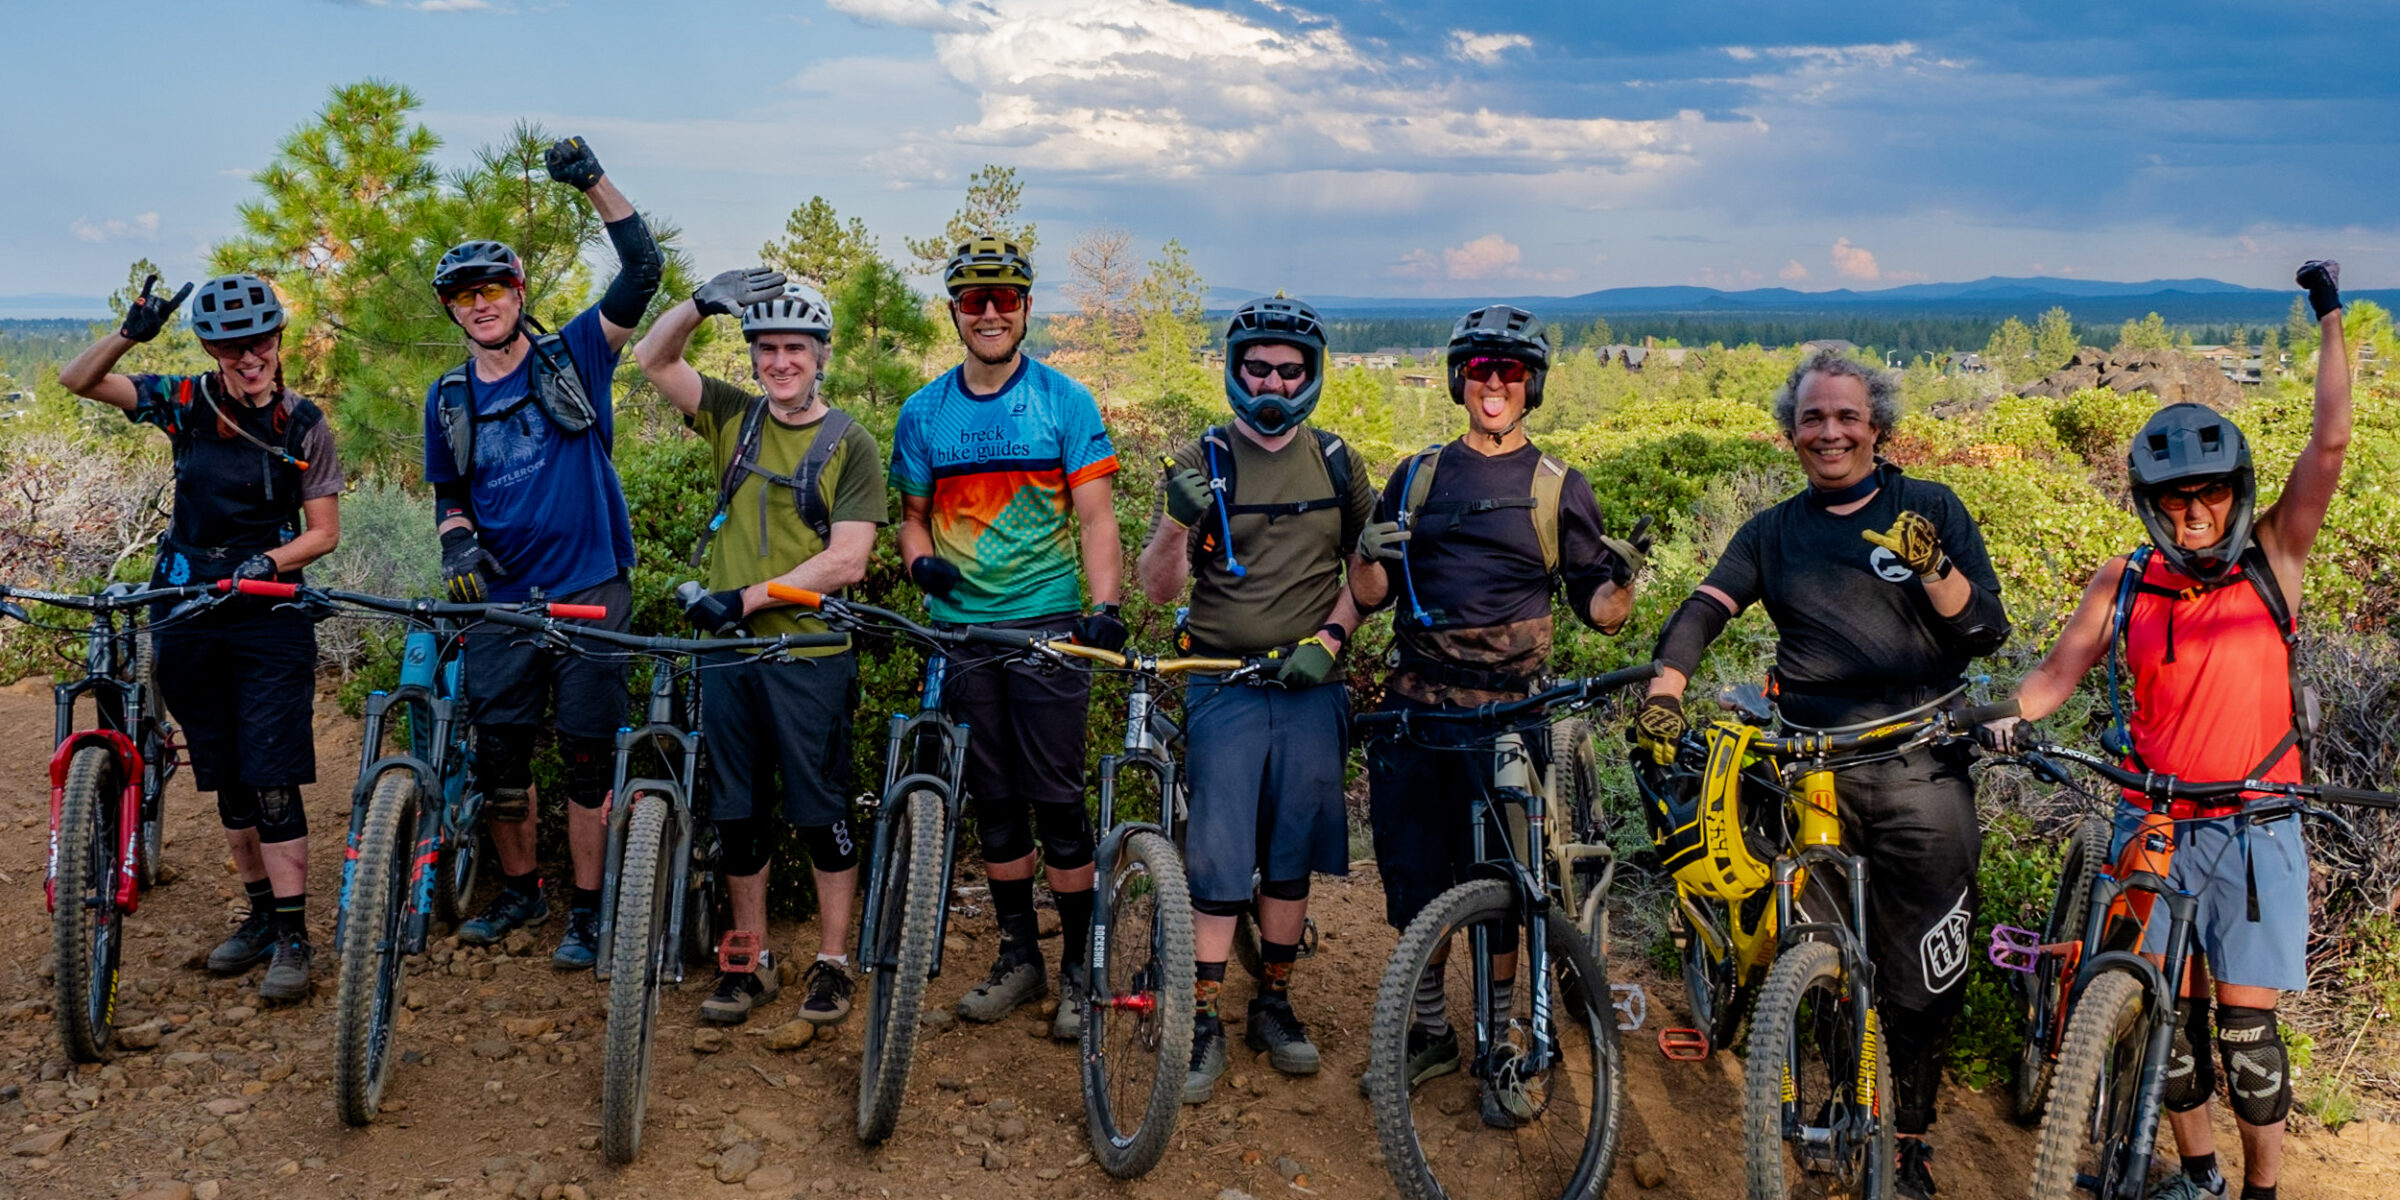 A class of mountain bikers poses for a group picture with a the cloudy sky in the background.